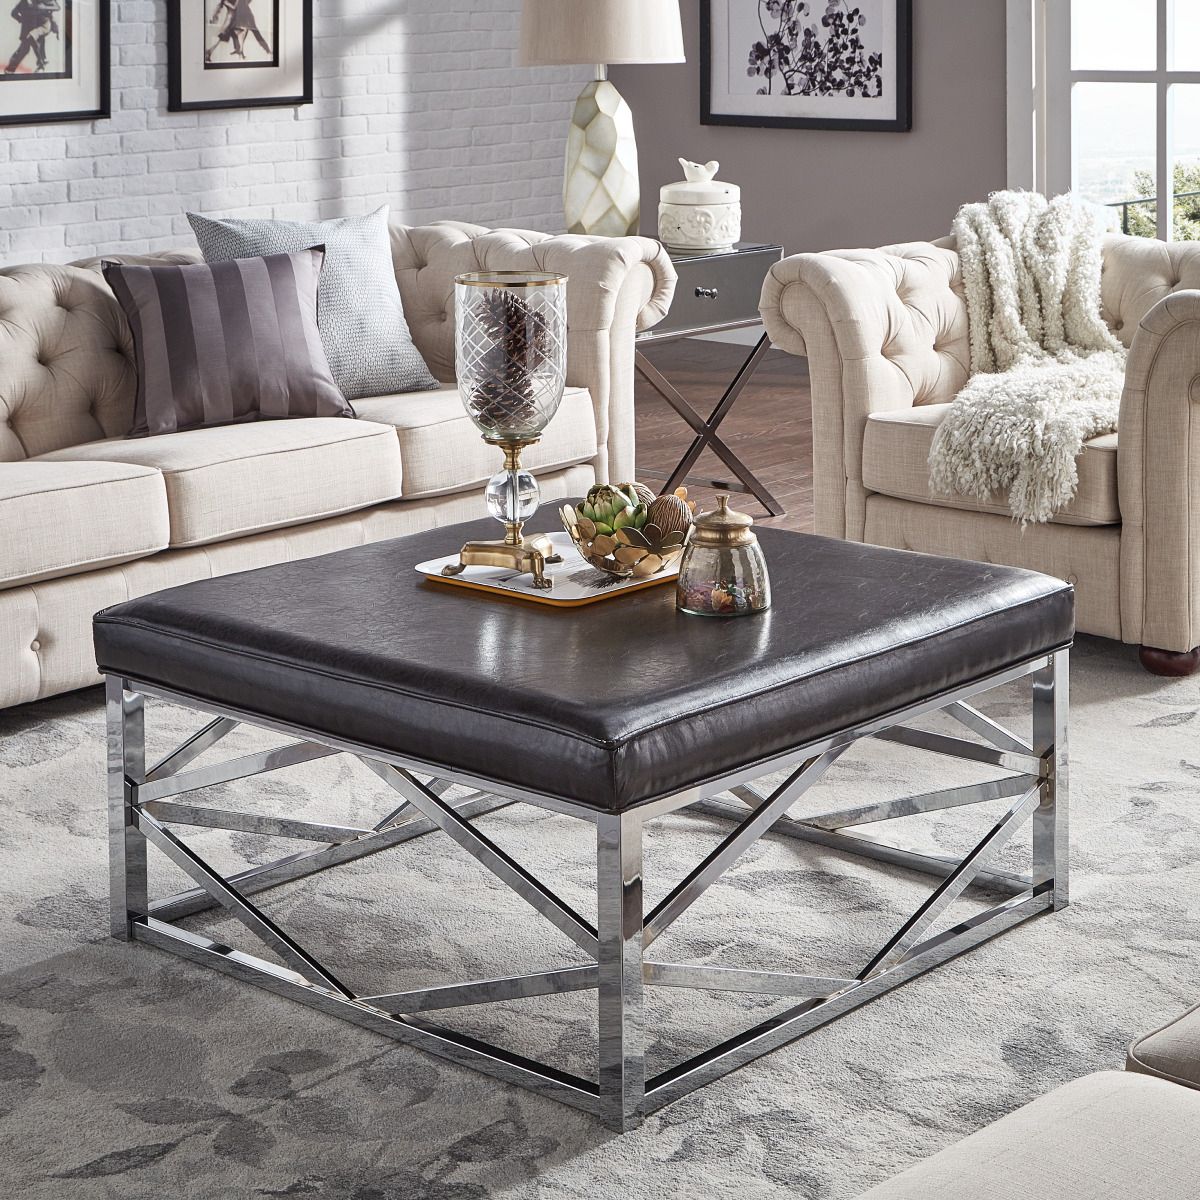 Weston Home Libby Smooth Top Cushion Ottoman Coffee Table With Chrome Inside Widely Used Chrome Metal Ottomans (View 1 of 10)